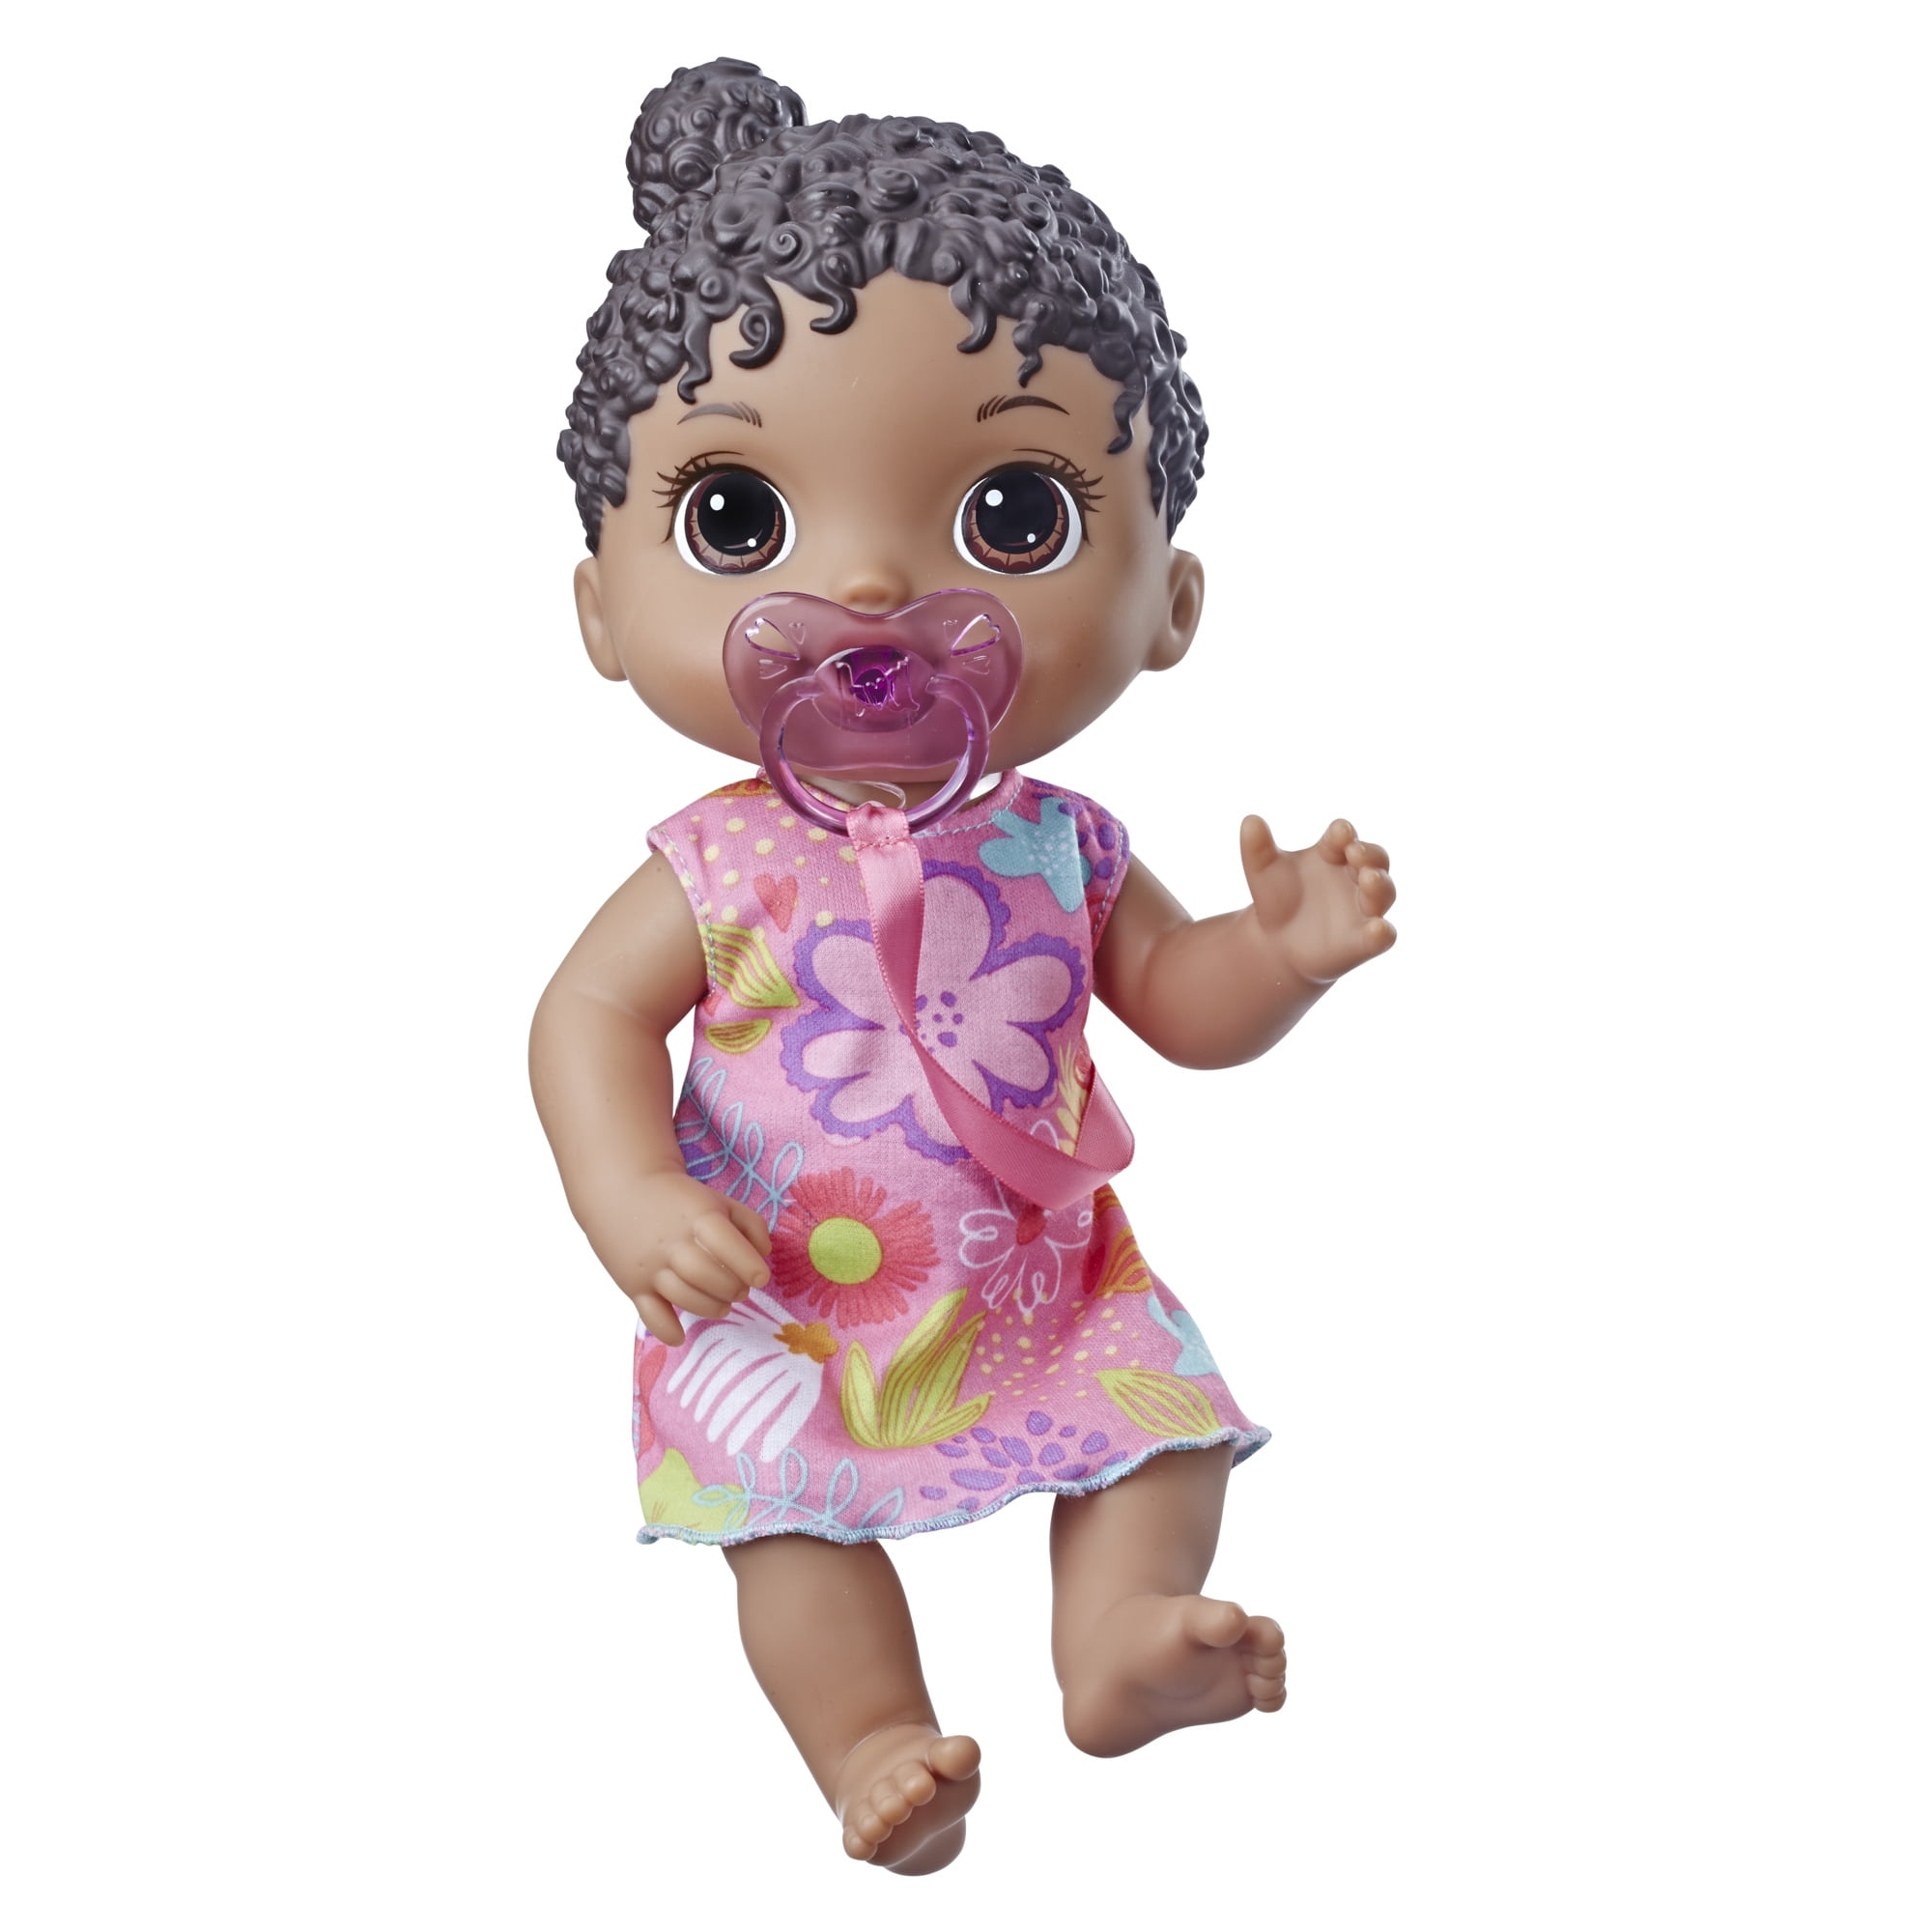 PINK PACIFIER AND BOTTLE FOR BABY ALIVE GO BYE BYE  NO DOLL INCLUDED 